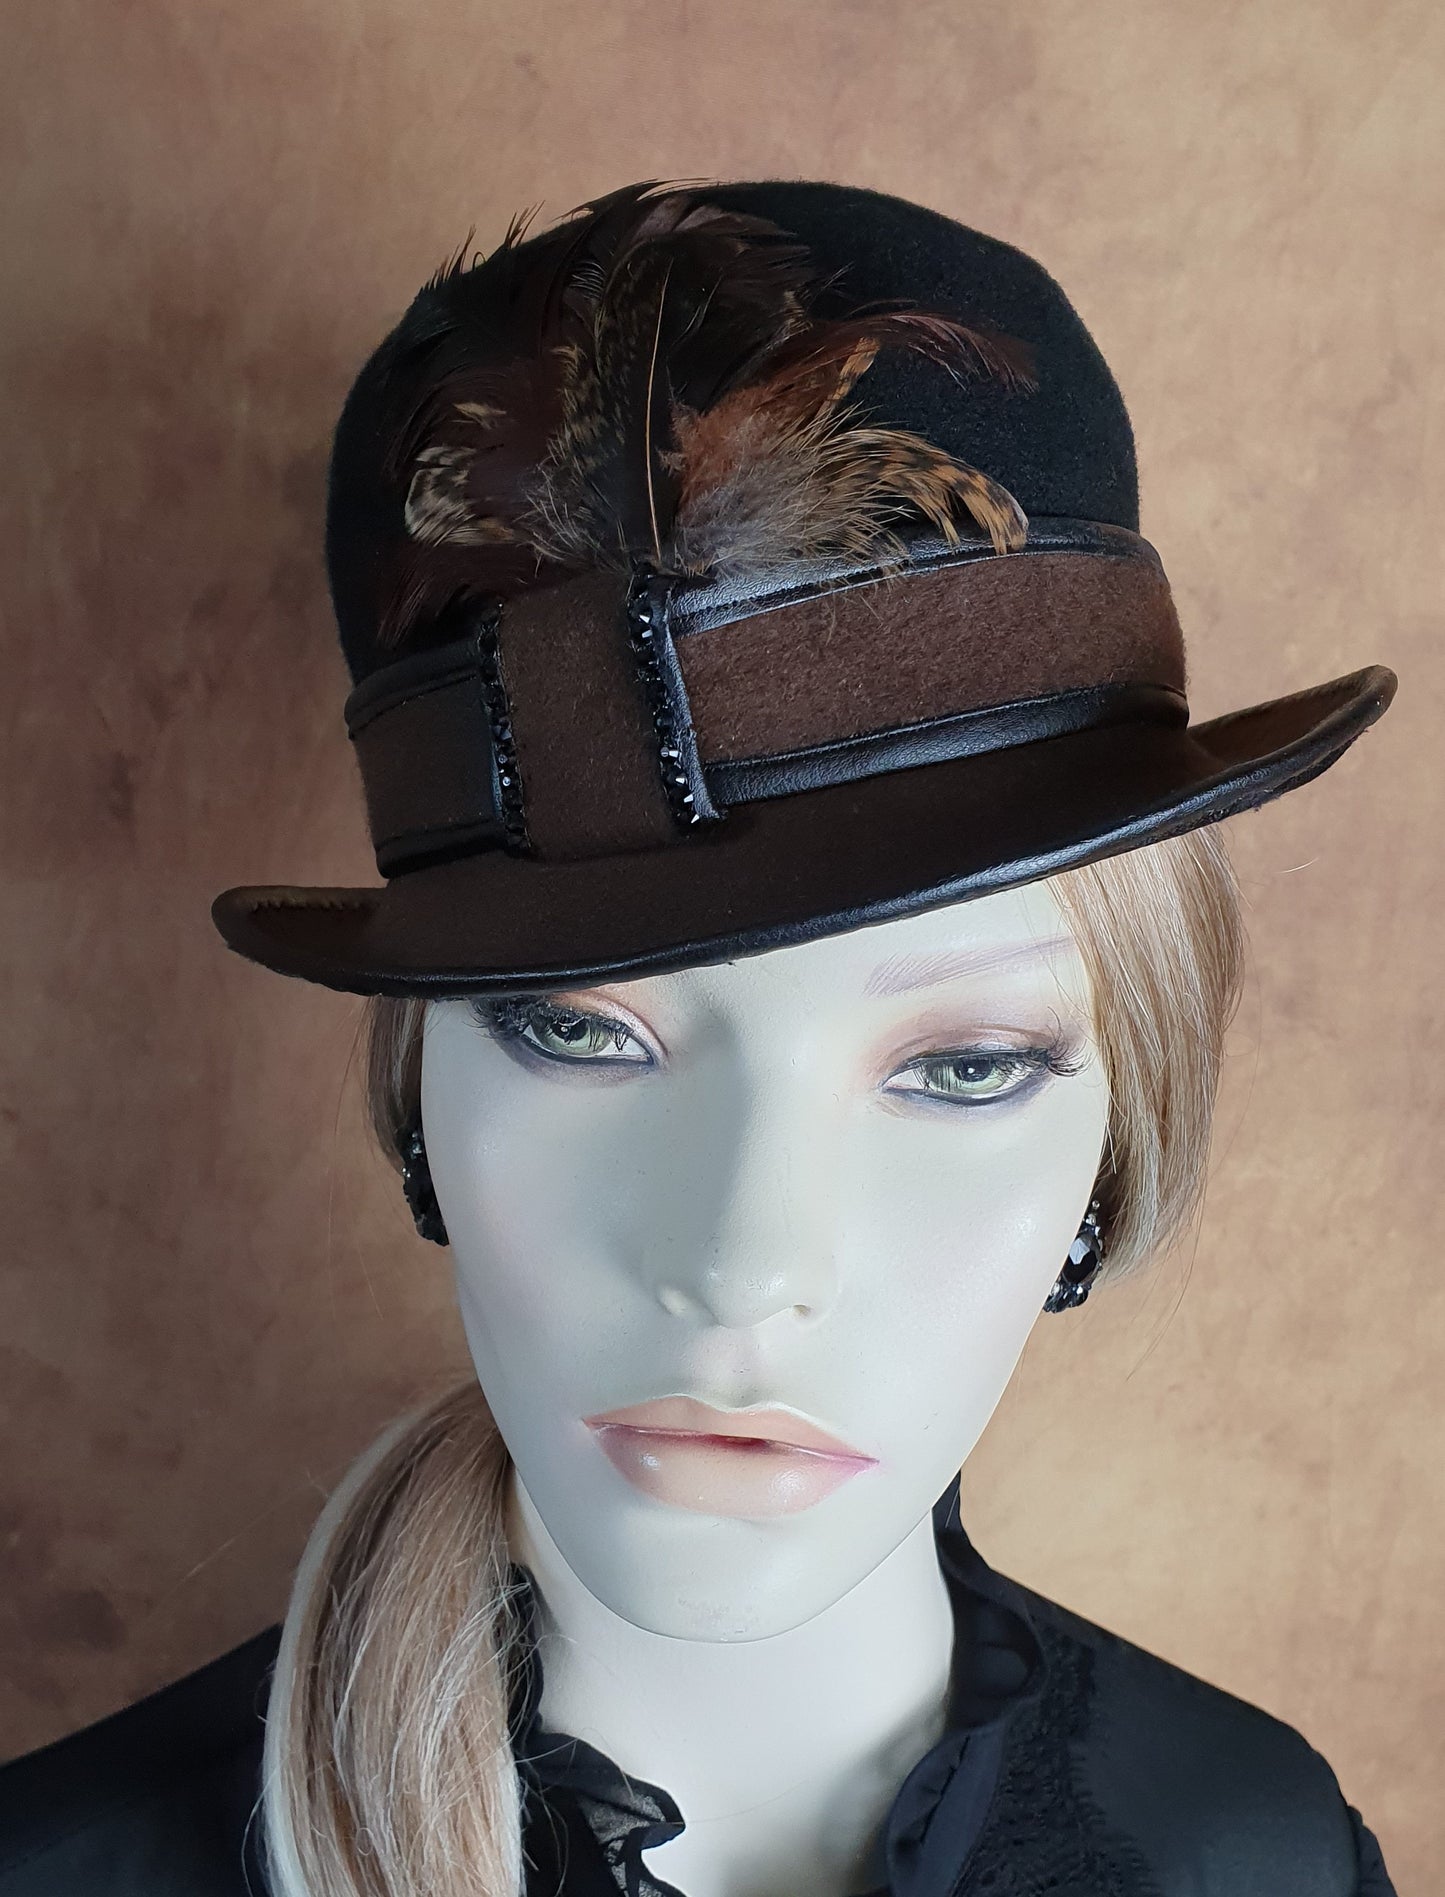 Handmade black and brown felt bowler hat with rooster feathers, ladies bowler hat, vintage bowler hat, derby hat, top hat for special events